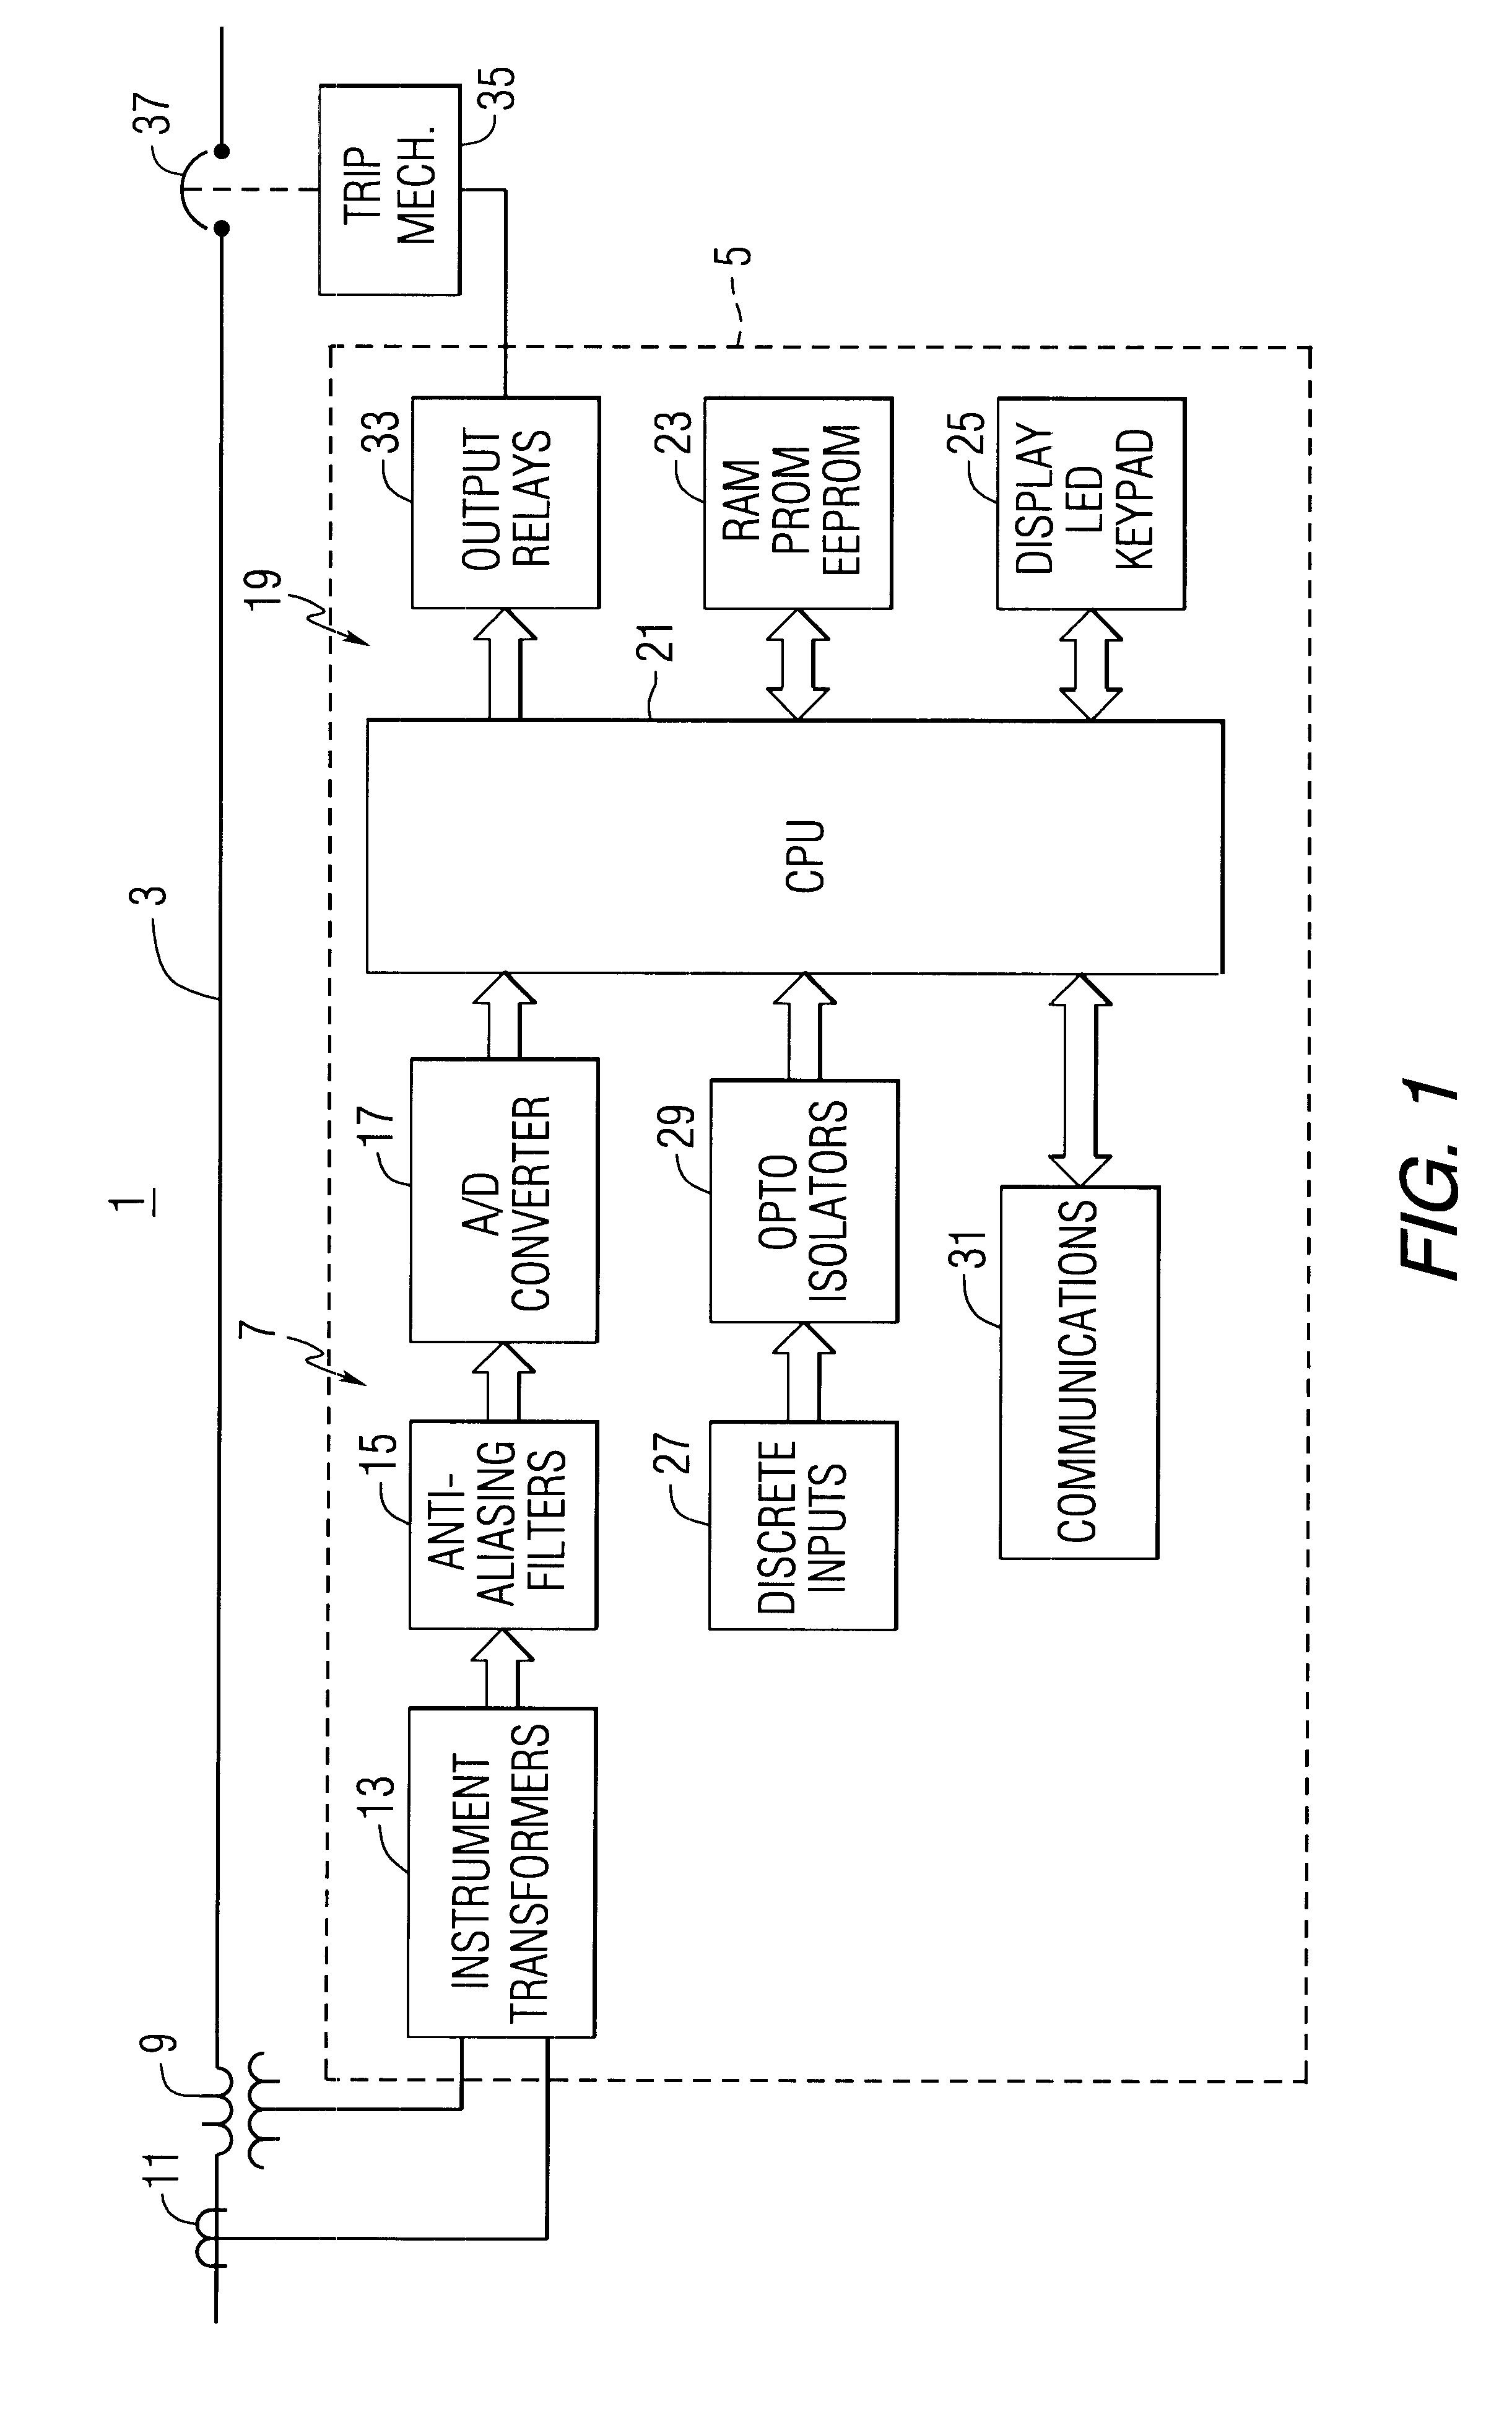 Apparatus providing on-line indication of frequency of an AC electric power system